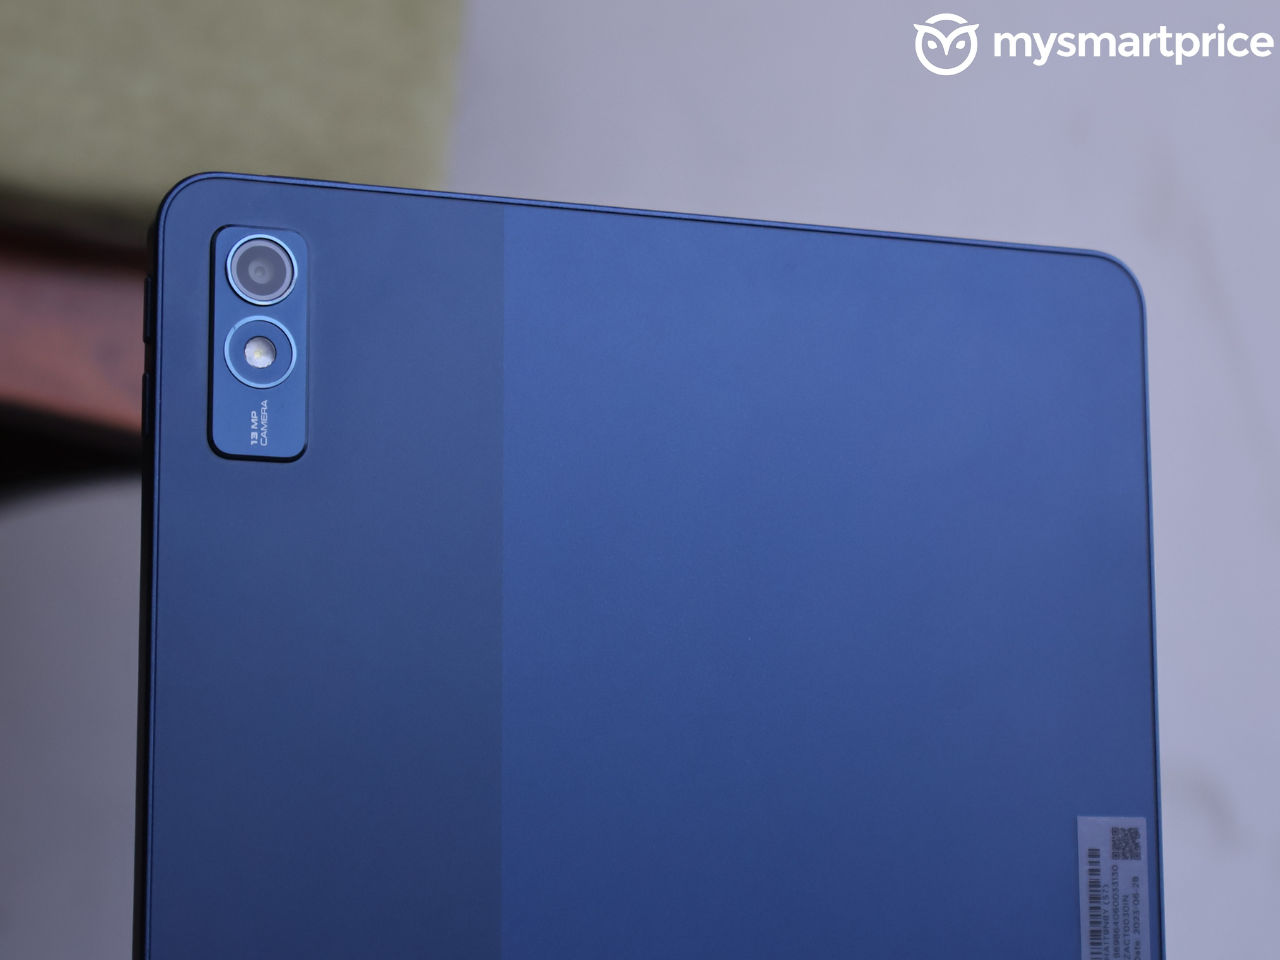 Lenovo Tab M10 5G brings a bunch of upgrades and one of them is in its name